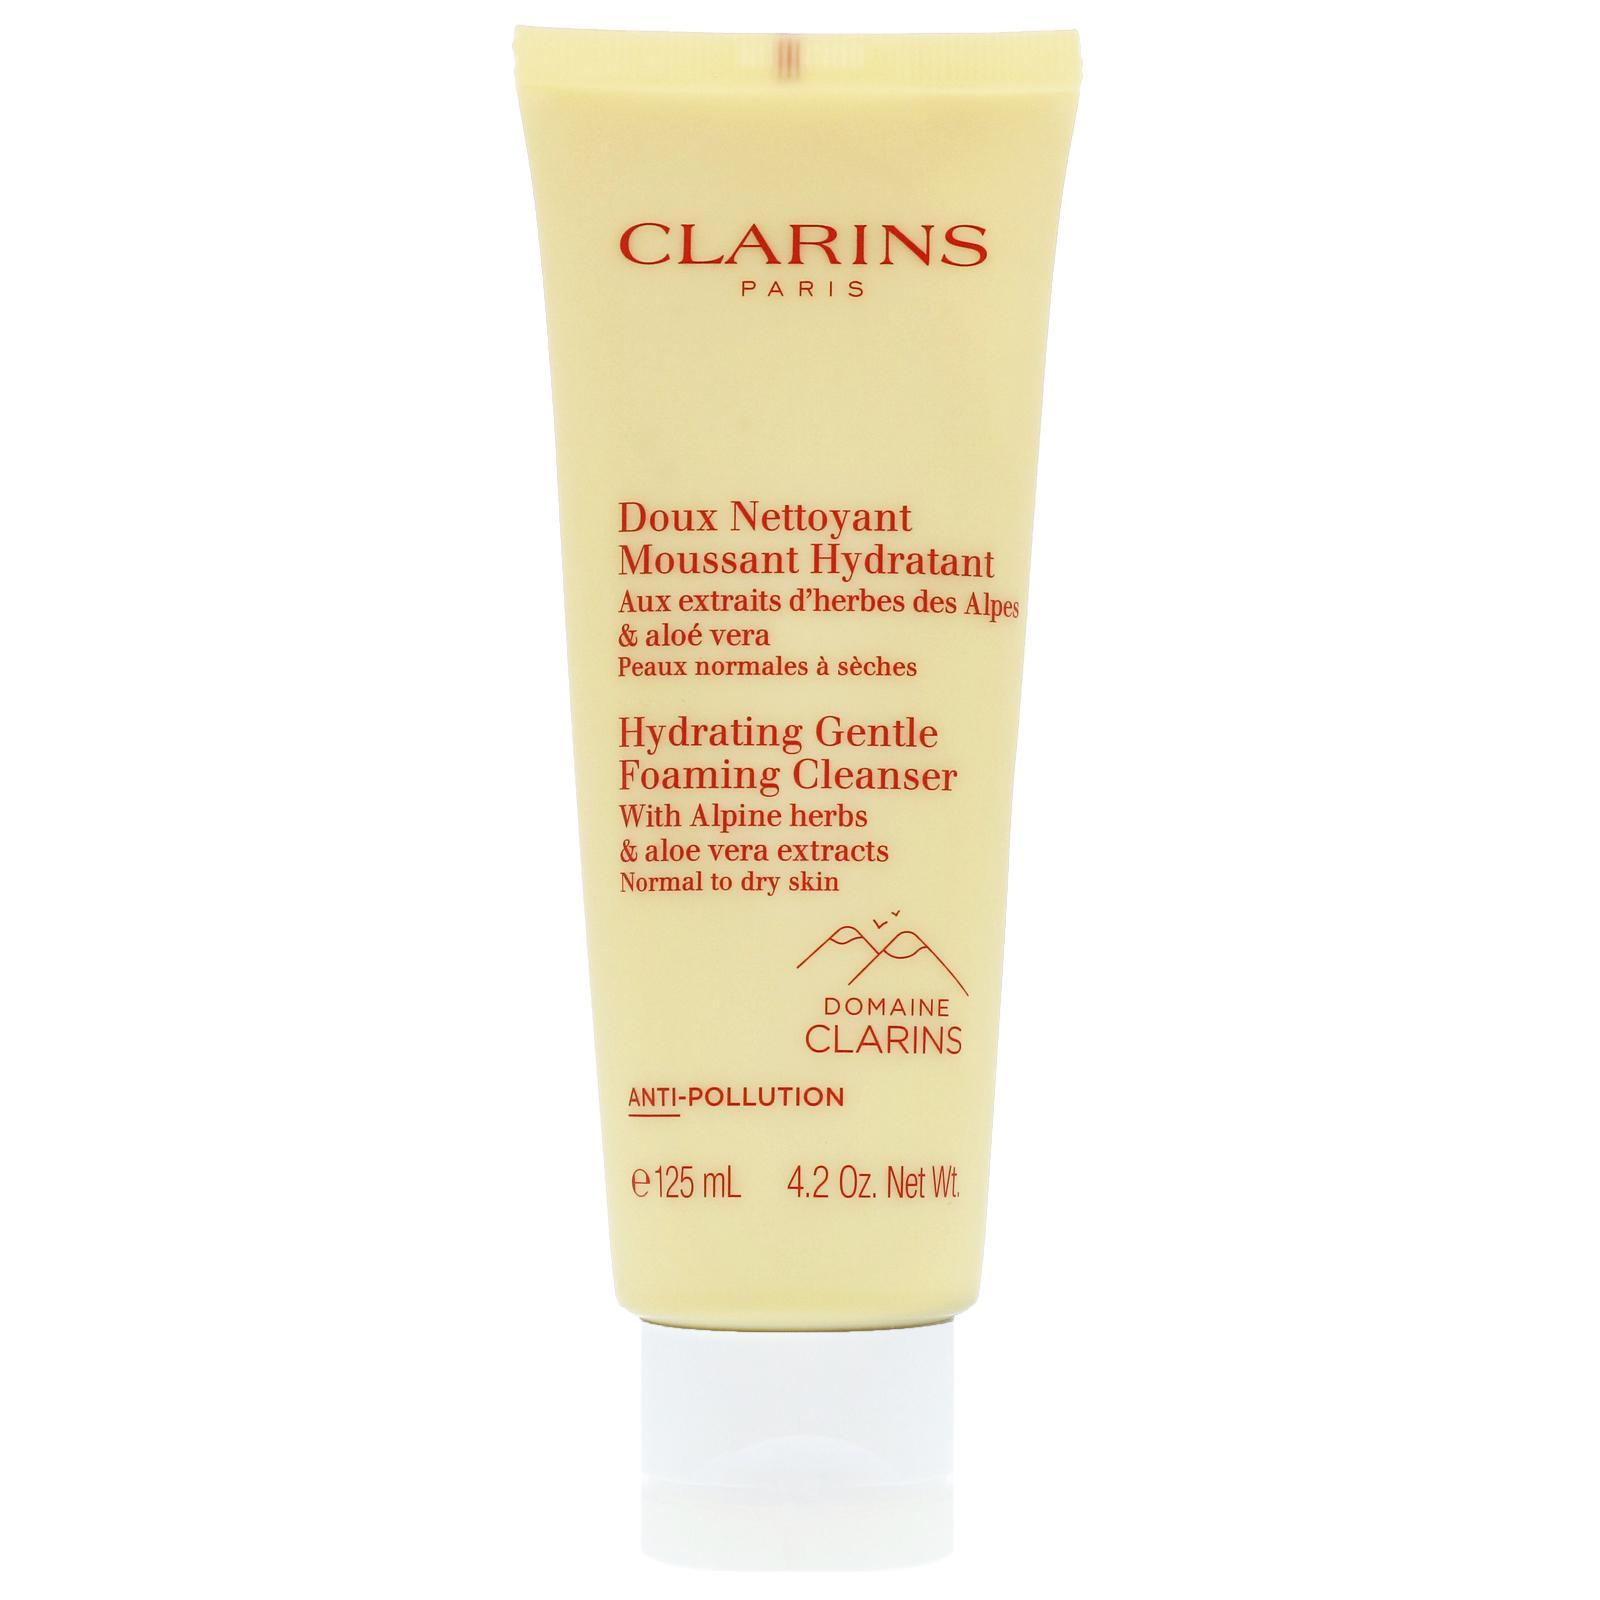 Clarins Purifying Gentle Foaming Cleanser With Alpine Herbs & Aloe Vera Extracts Почистваща пяна за нормална към суха кожа без опаковка